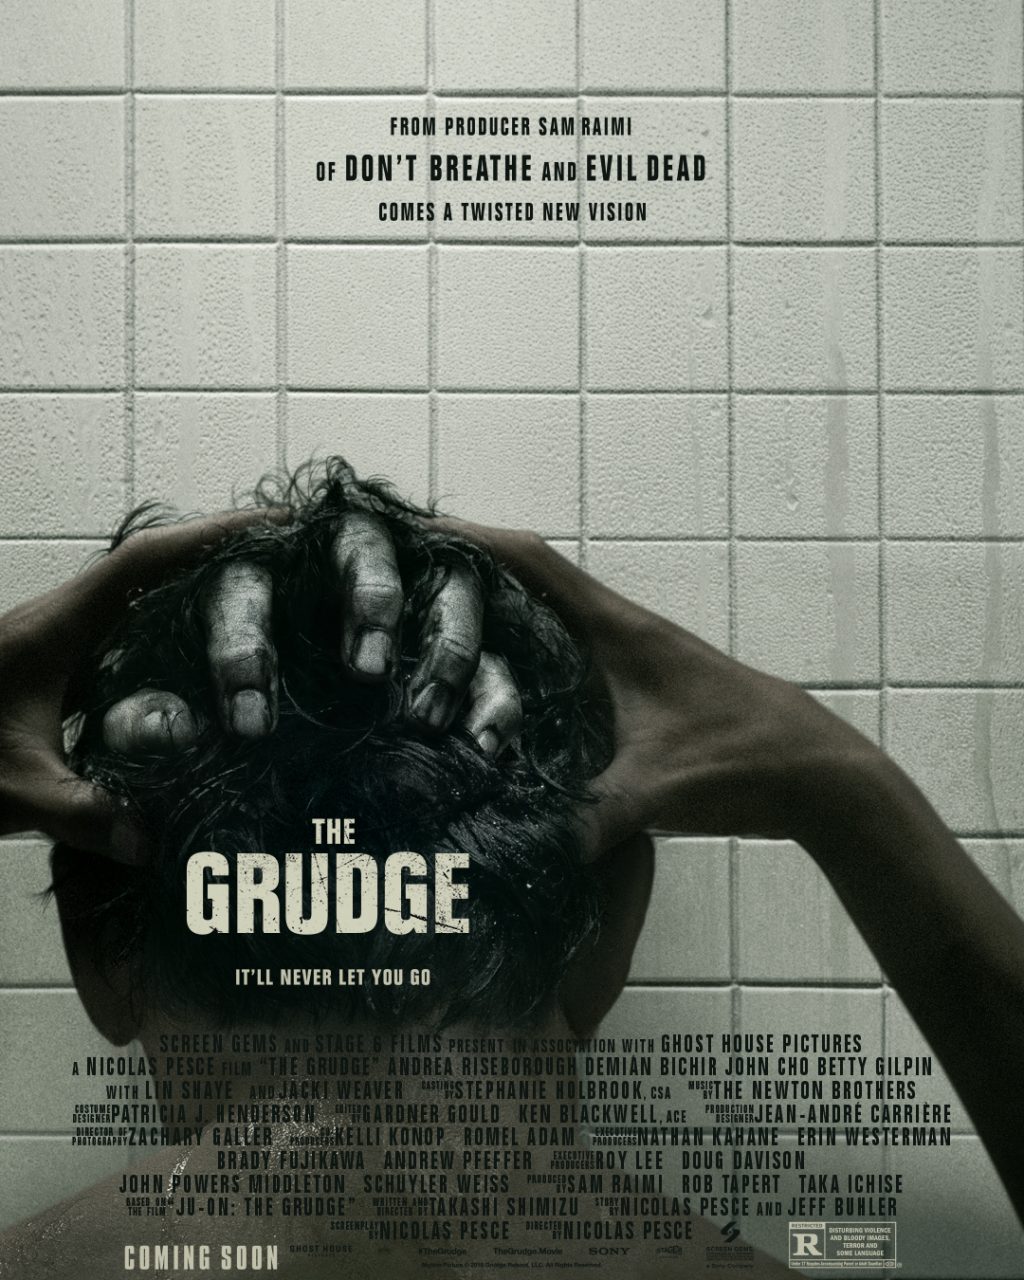 The Grudge poster (Sony Pictures)